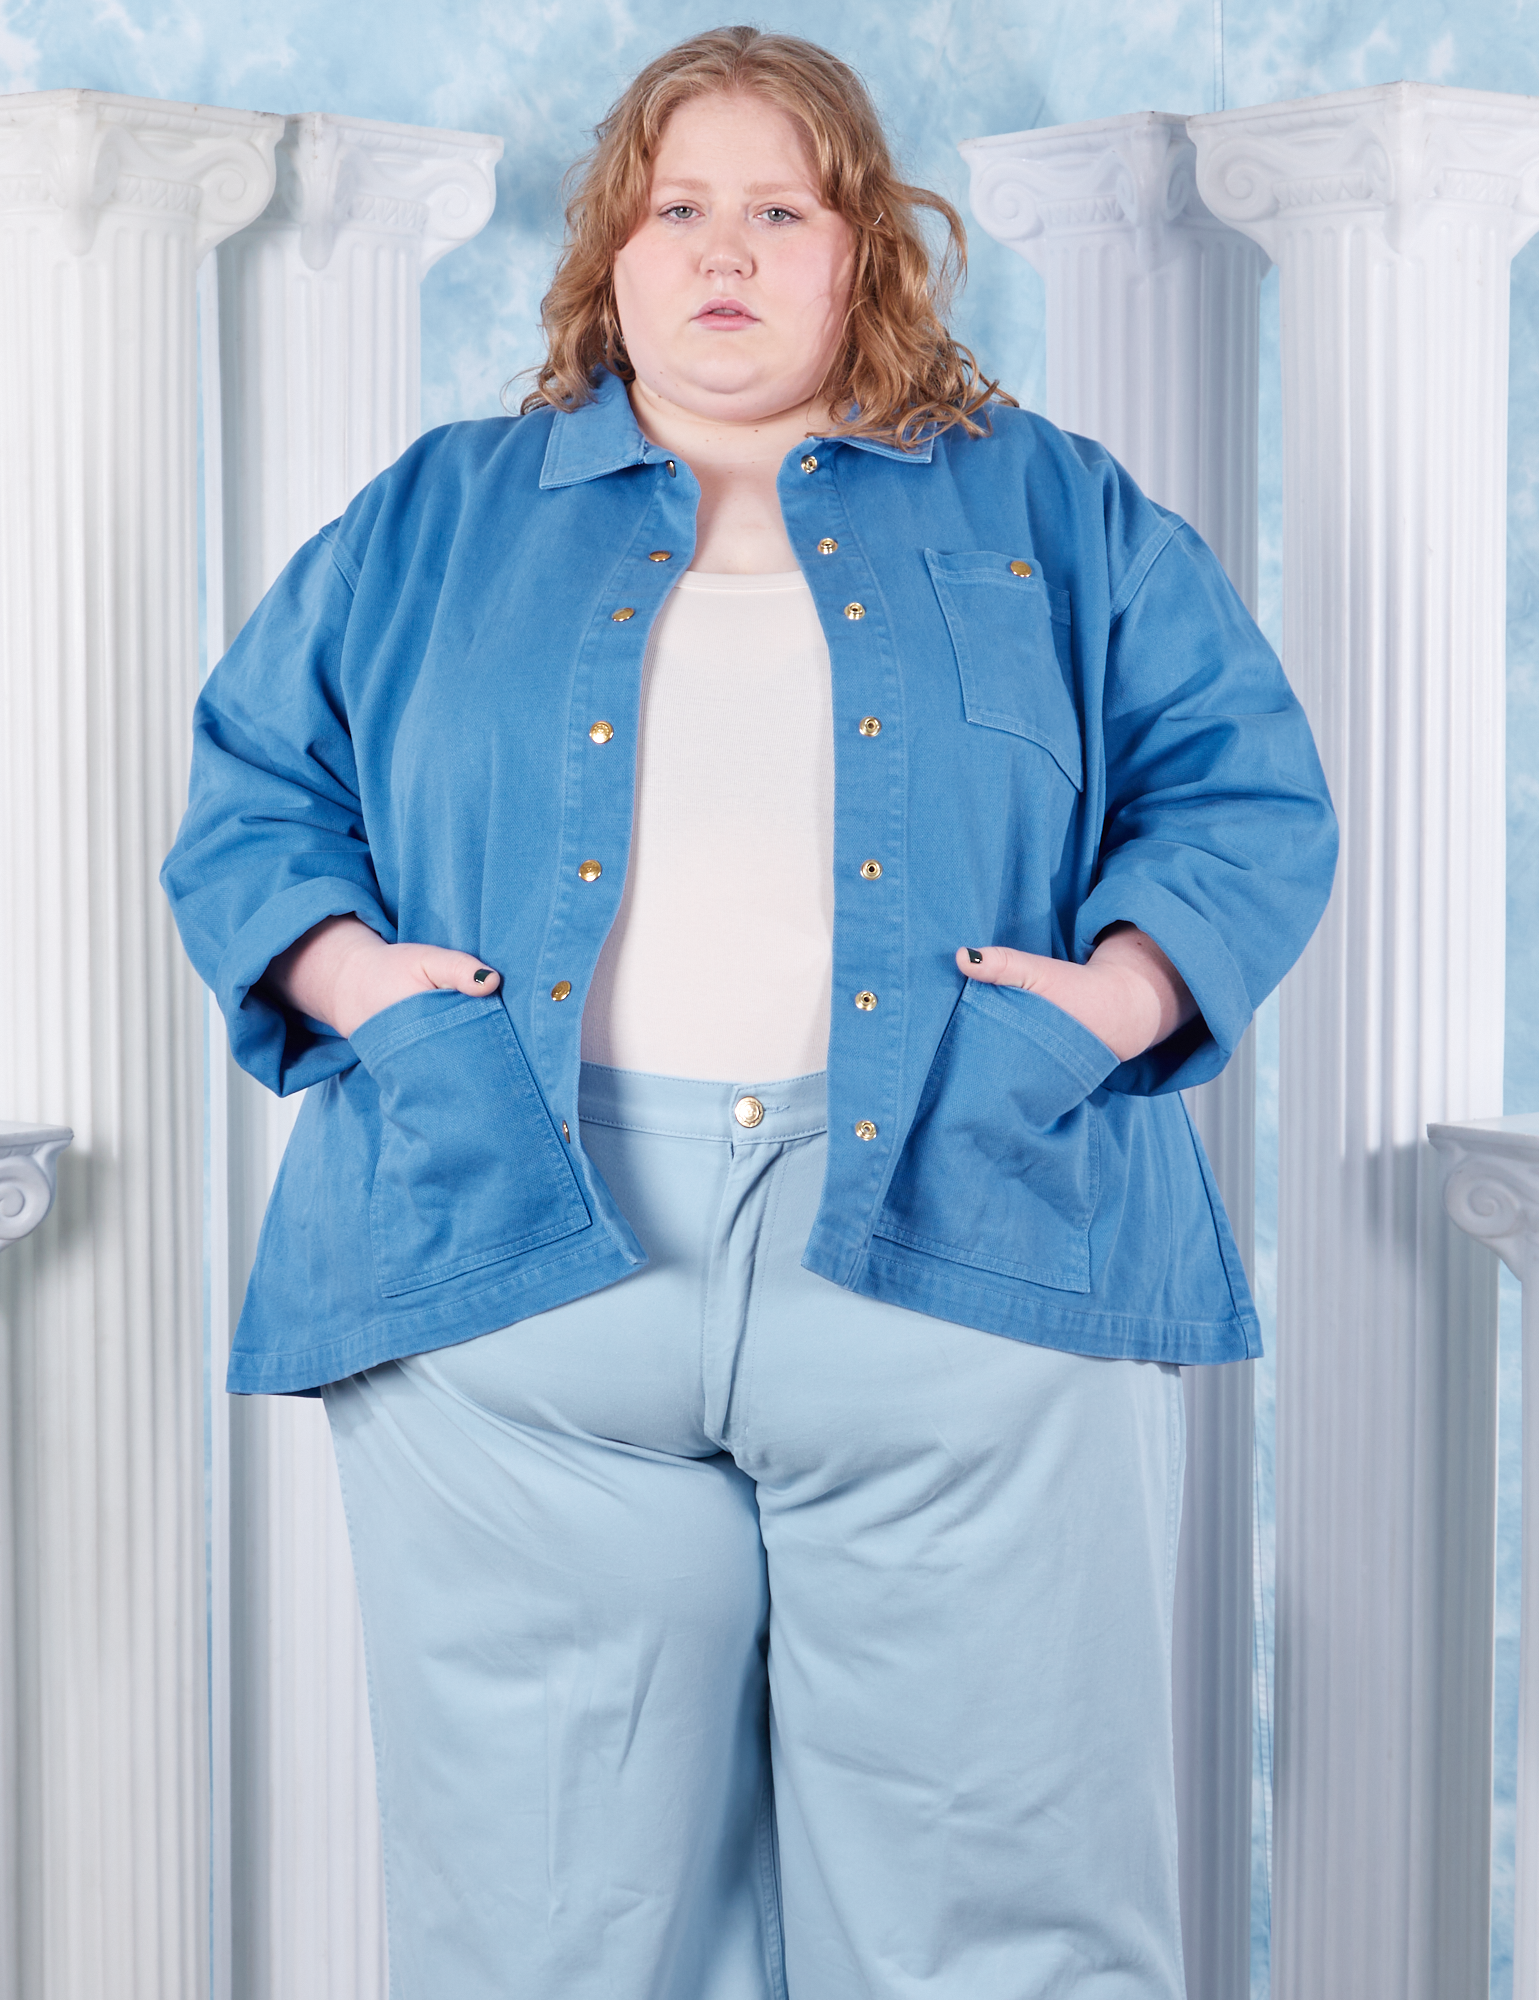 Catie is wearing 4XL Neoclassical Work Jacket in Blue Venus paired with vintage off-white Tank Top and baby blue Bell Bottoms